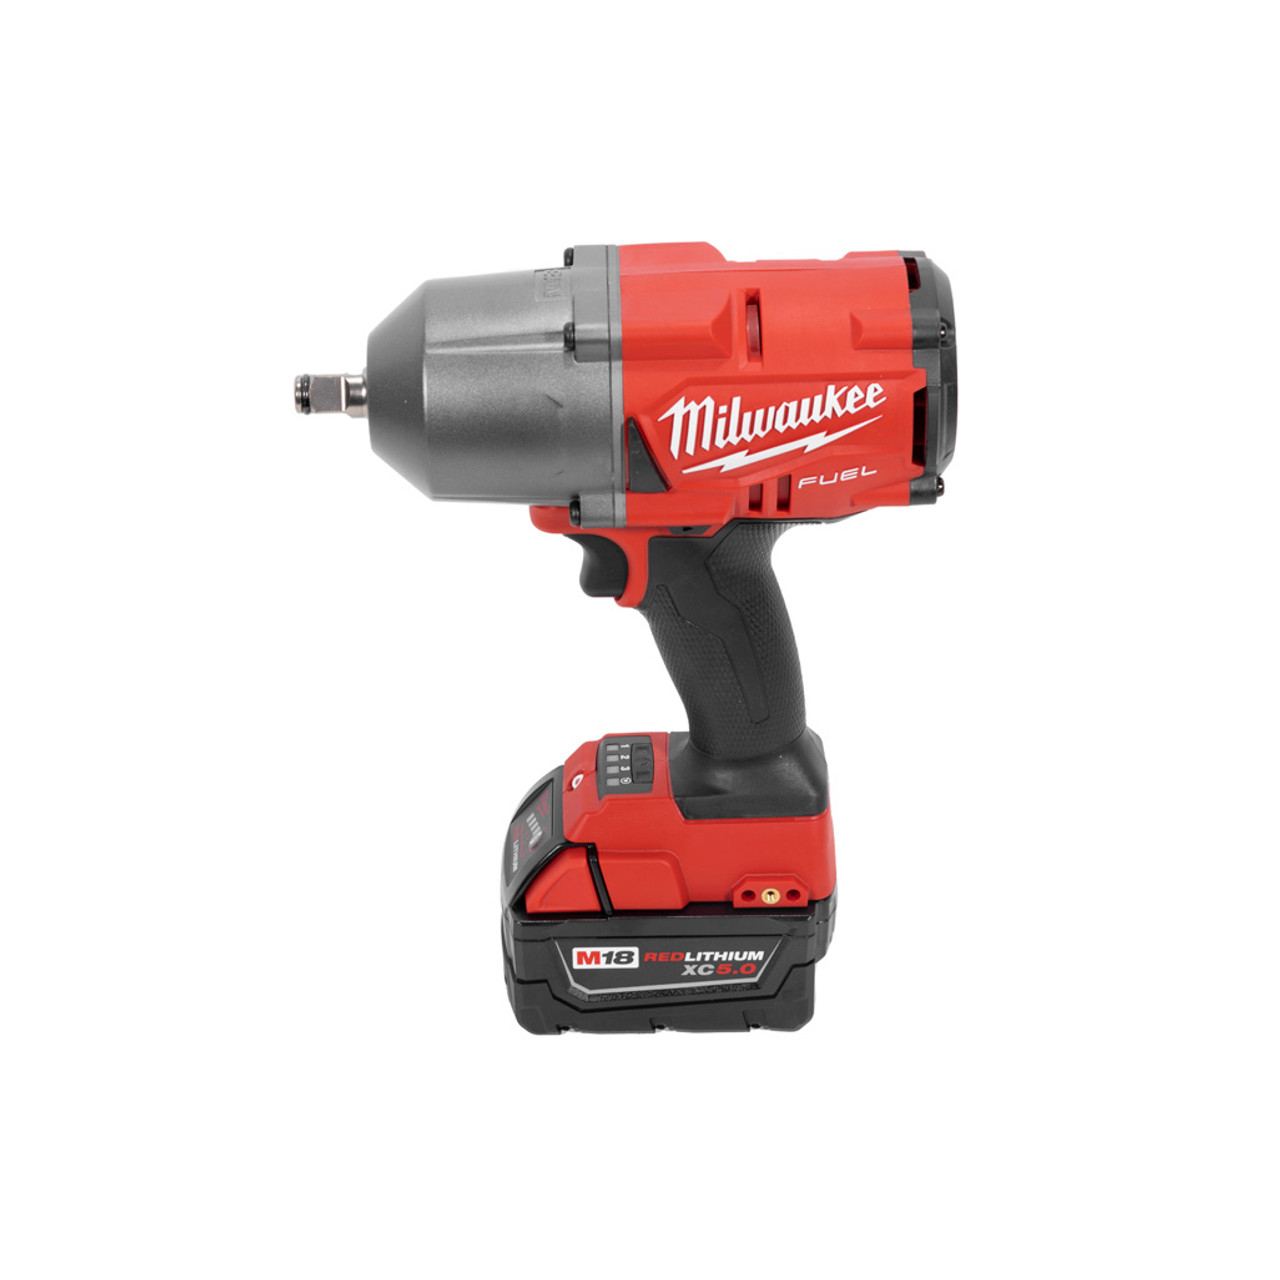 Milwaukee 1/2-In Impact Wrench With Friction Ring Kit M18 Fuel 18V  (2767-22) JB Tools